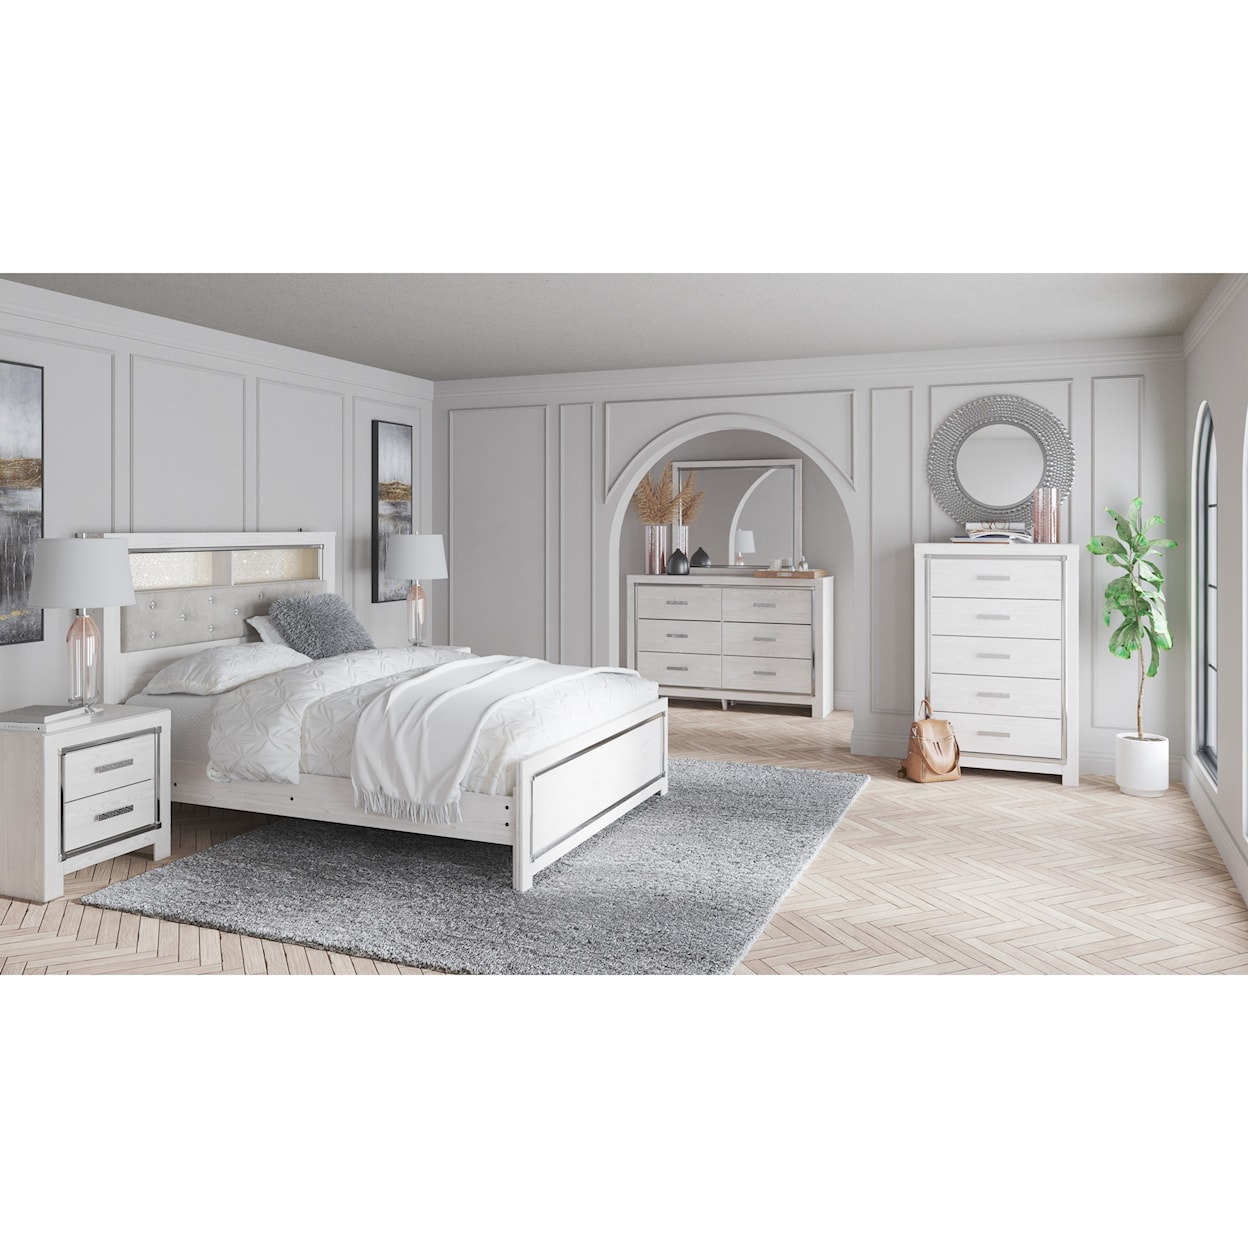 Ashley Signature Design Altyra Full Bedroom Group